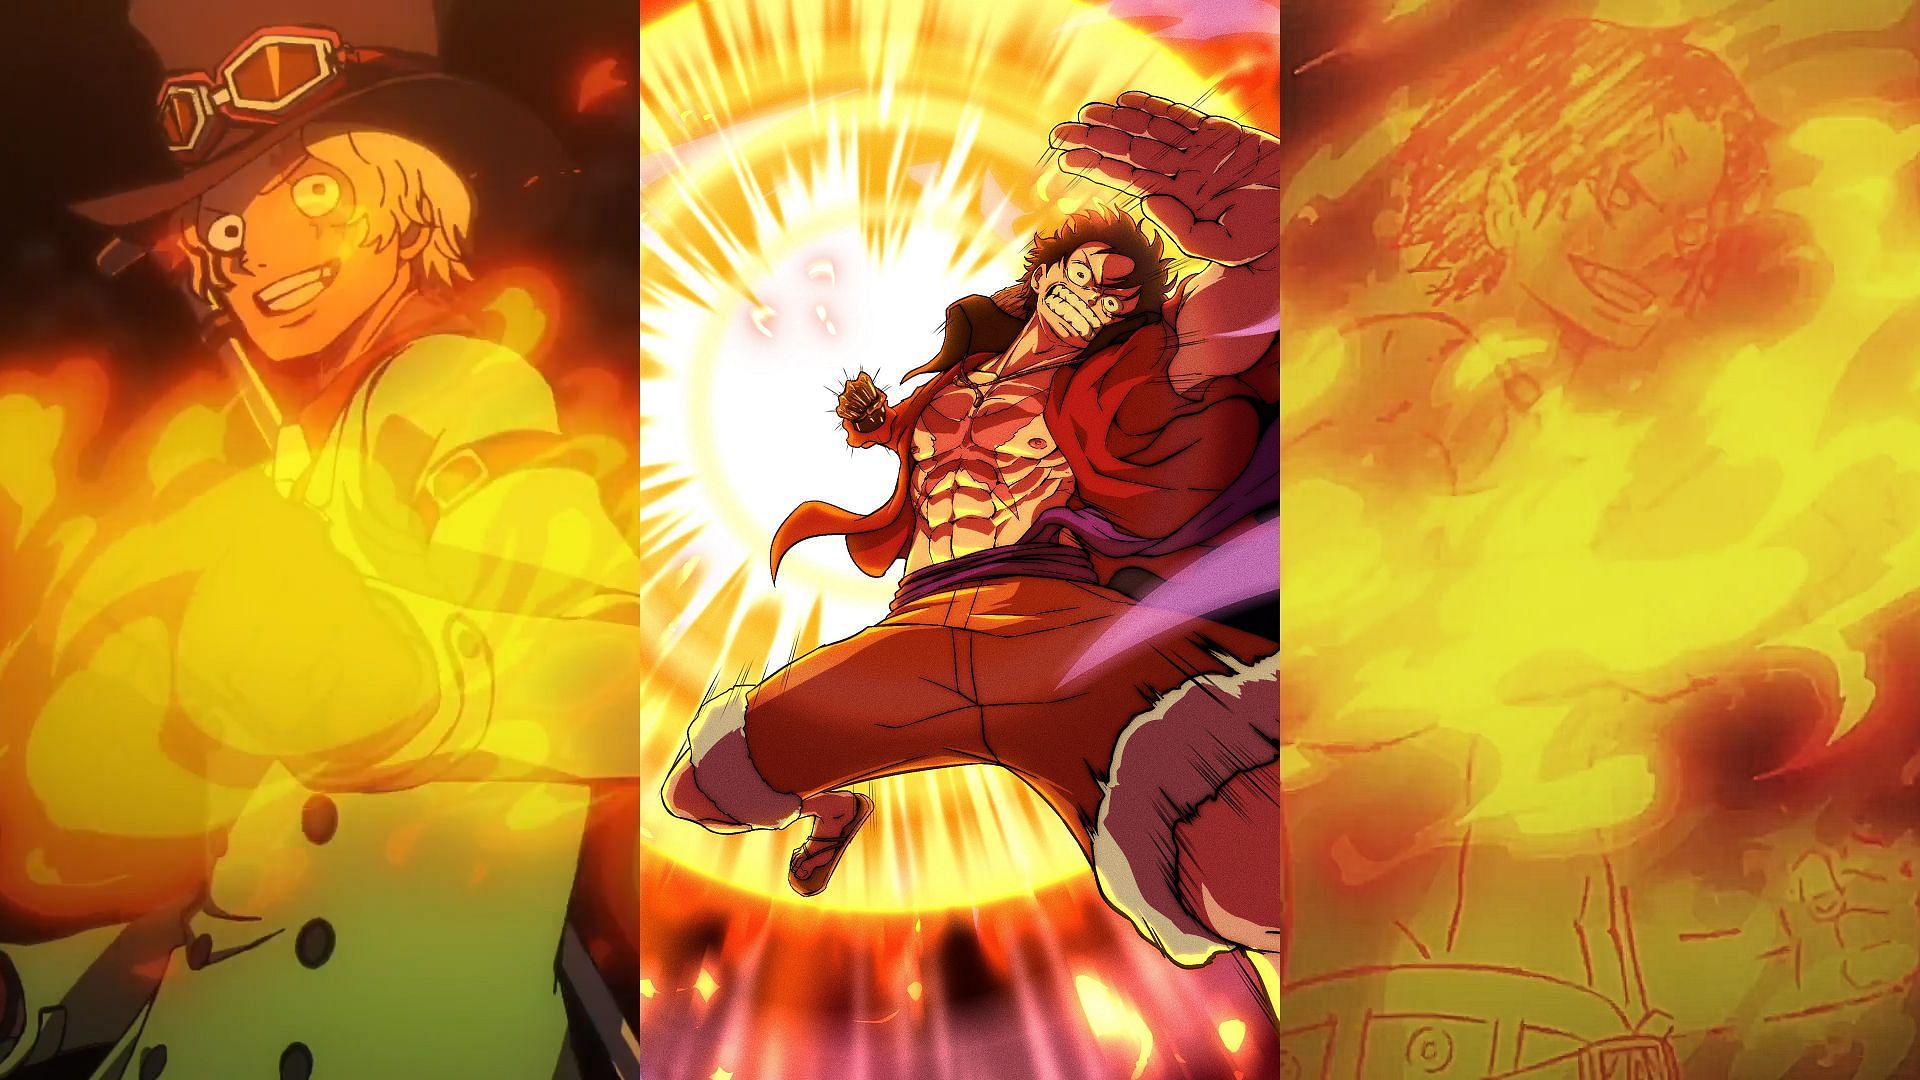 In One Piece, which Devil Fruits are stronger than the Flame Flame